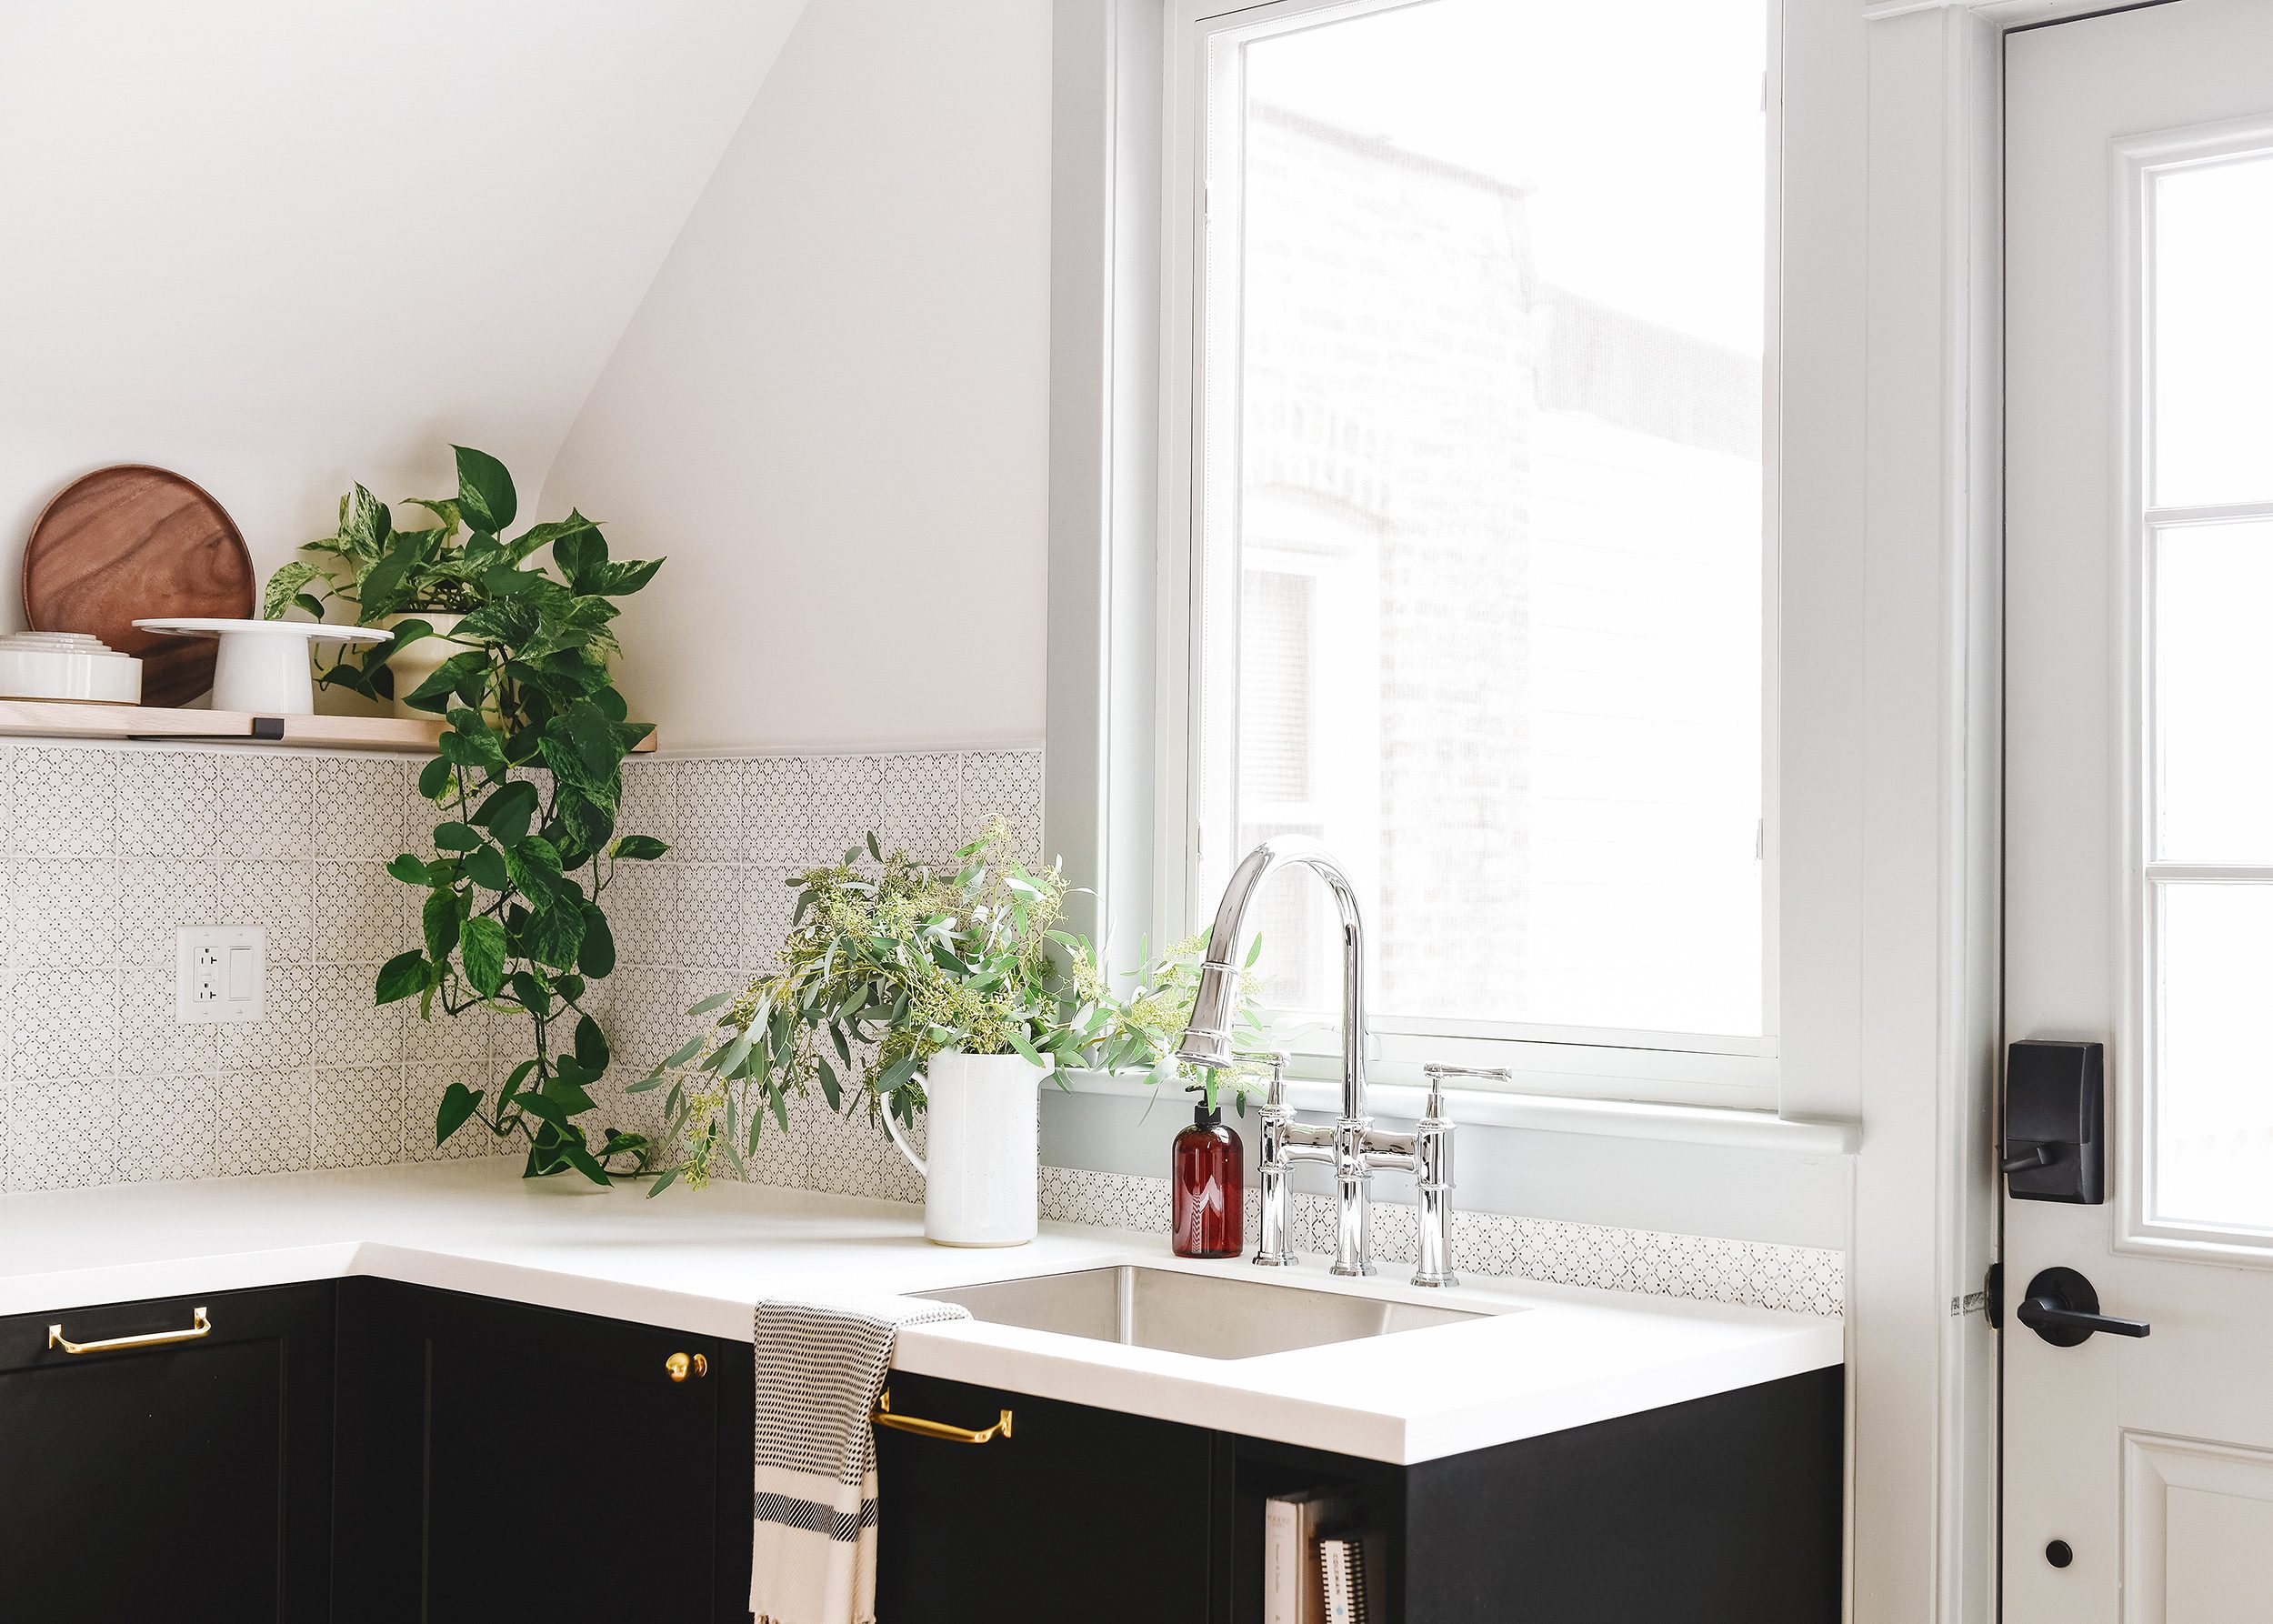 Small kitchen inspiration: Black base cabinets with floating shelves above a white countertop, polished chrome Elkay faucet and stainless steel sink. | via Yellow Brick Home